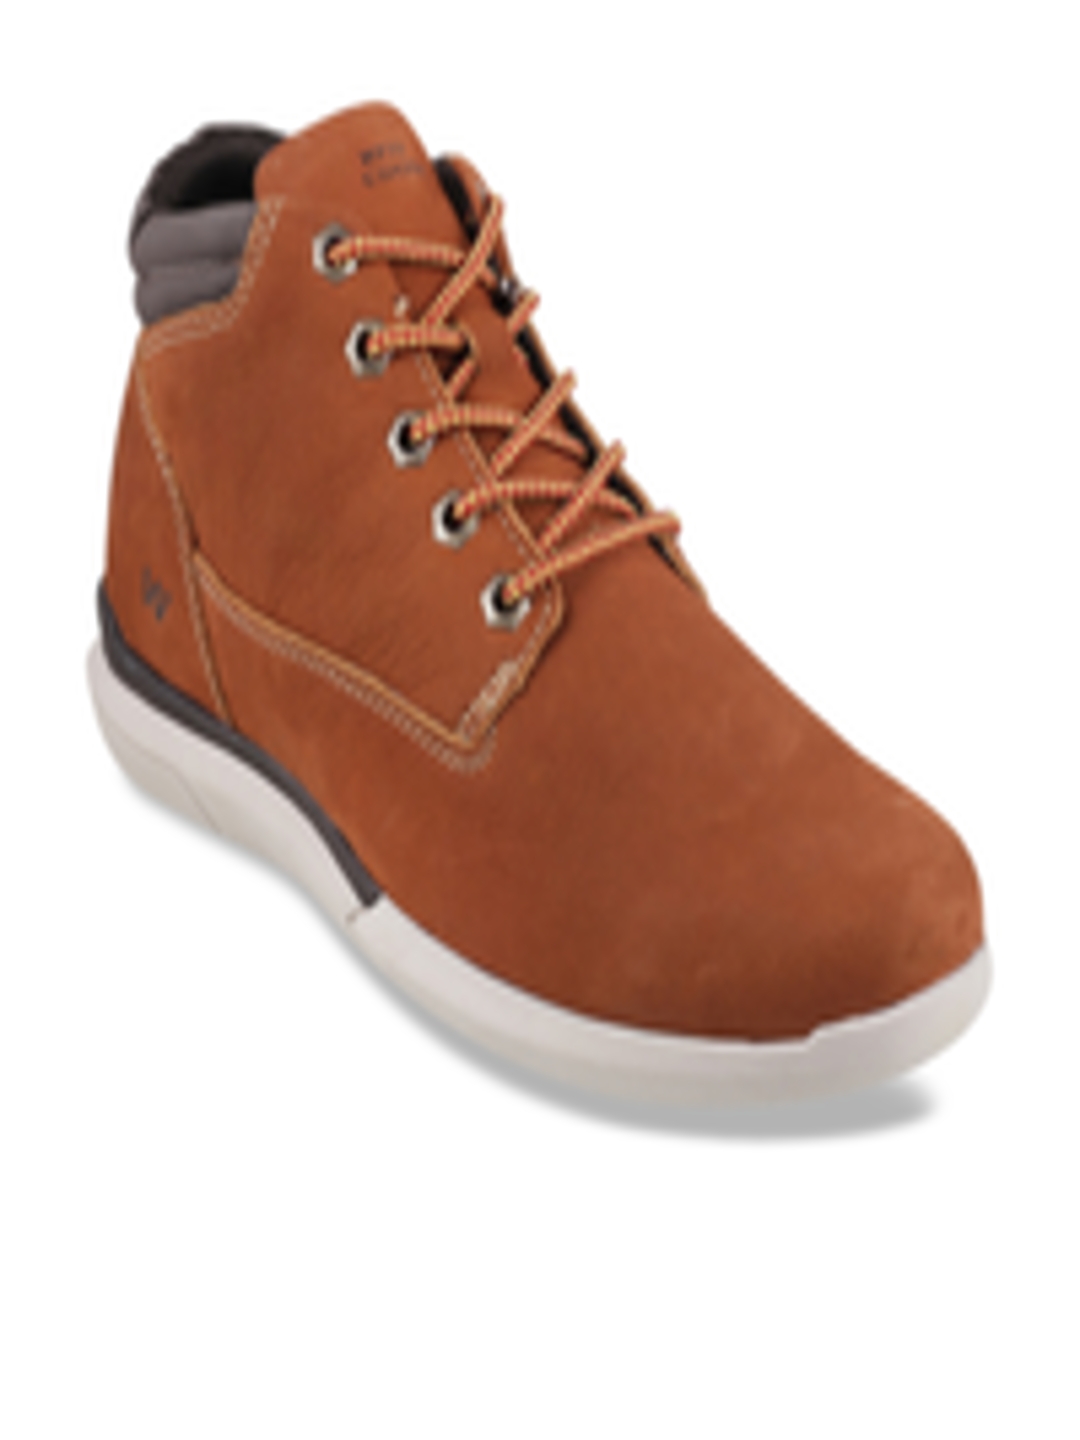 Buy WEST COAST Men Tan Brown Solid Leather High Top Flat Boots - Boots ...